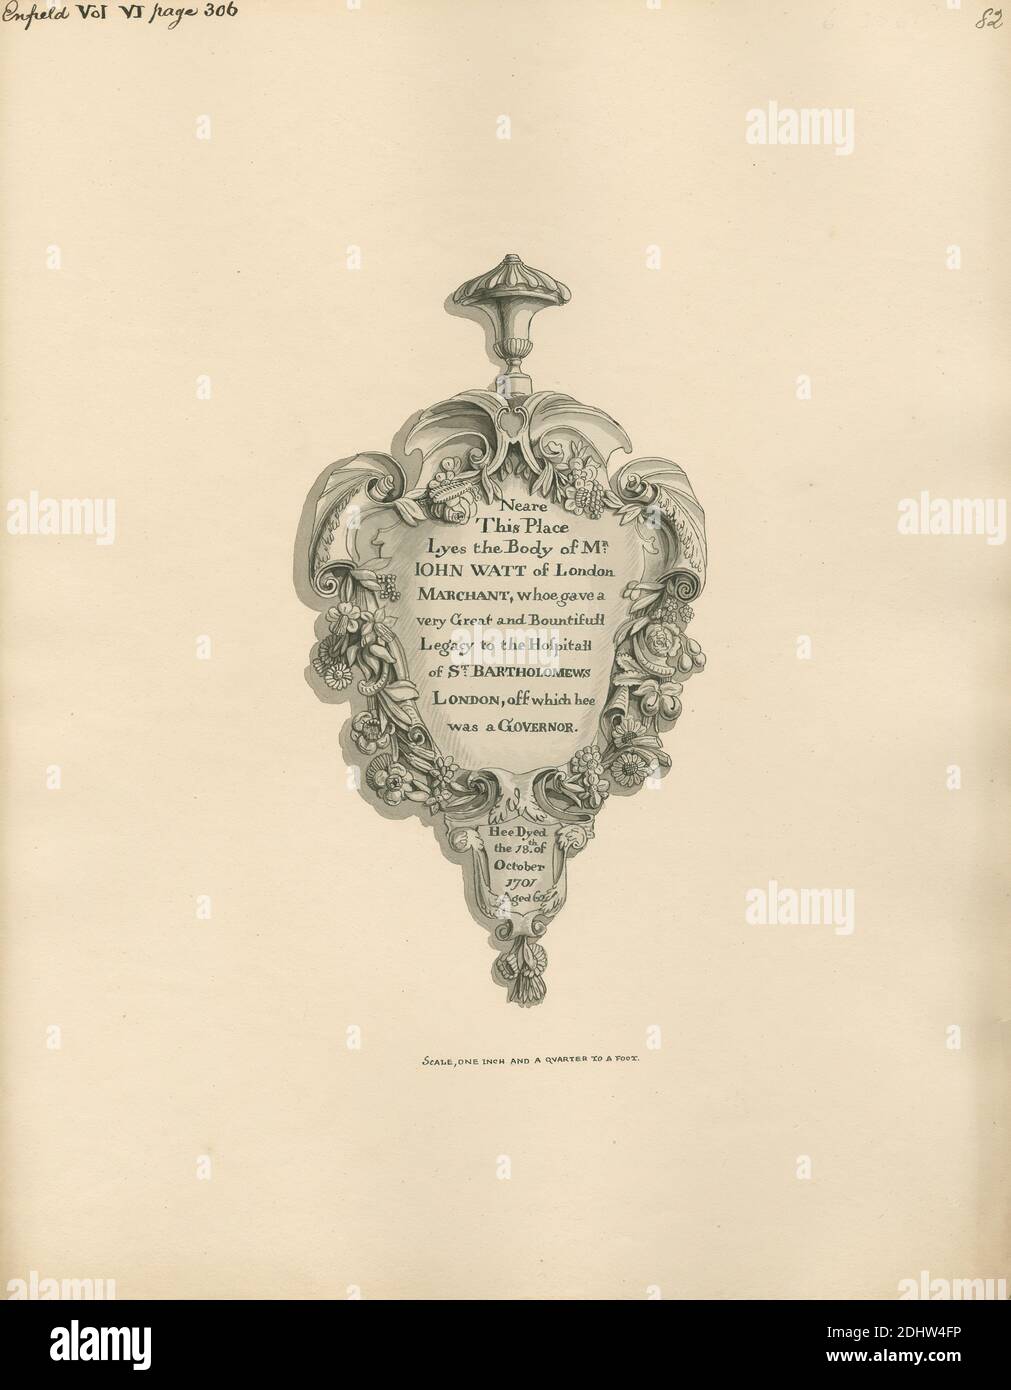 Memorial to John Watt from Enfield Church, Attributed to Daniel Lysons, 1762–1834, British, between 1796 and 1811, Pen and black ink and gray wash over graphite on medium, slightly textured, cream wove paper, Sheet: 13 3/4 × 11 1/8 inches (34.9 × 28.3 cm), architectural subject, church, memorial, Enfield, England, Greater London, London, St. Andrew's Church, United Kingdom Stock Photo